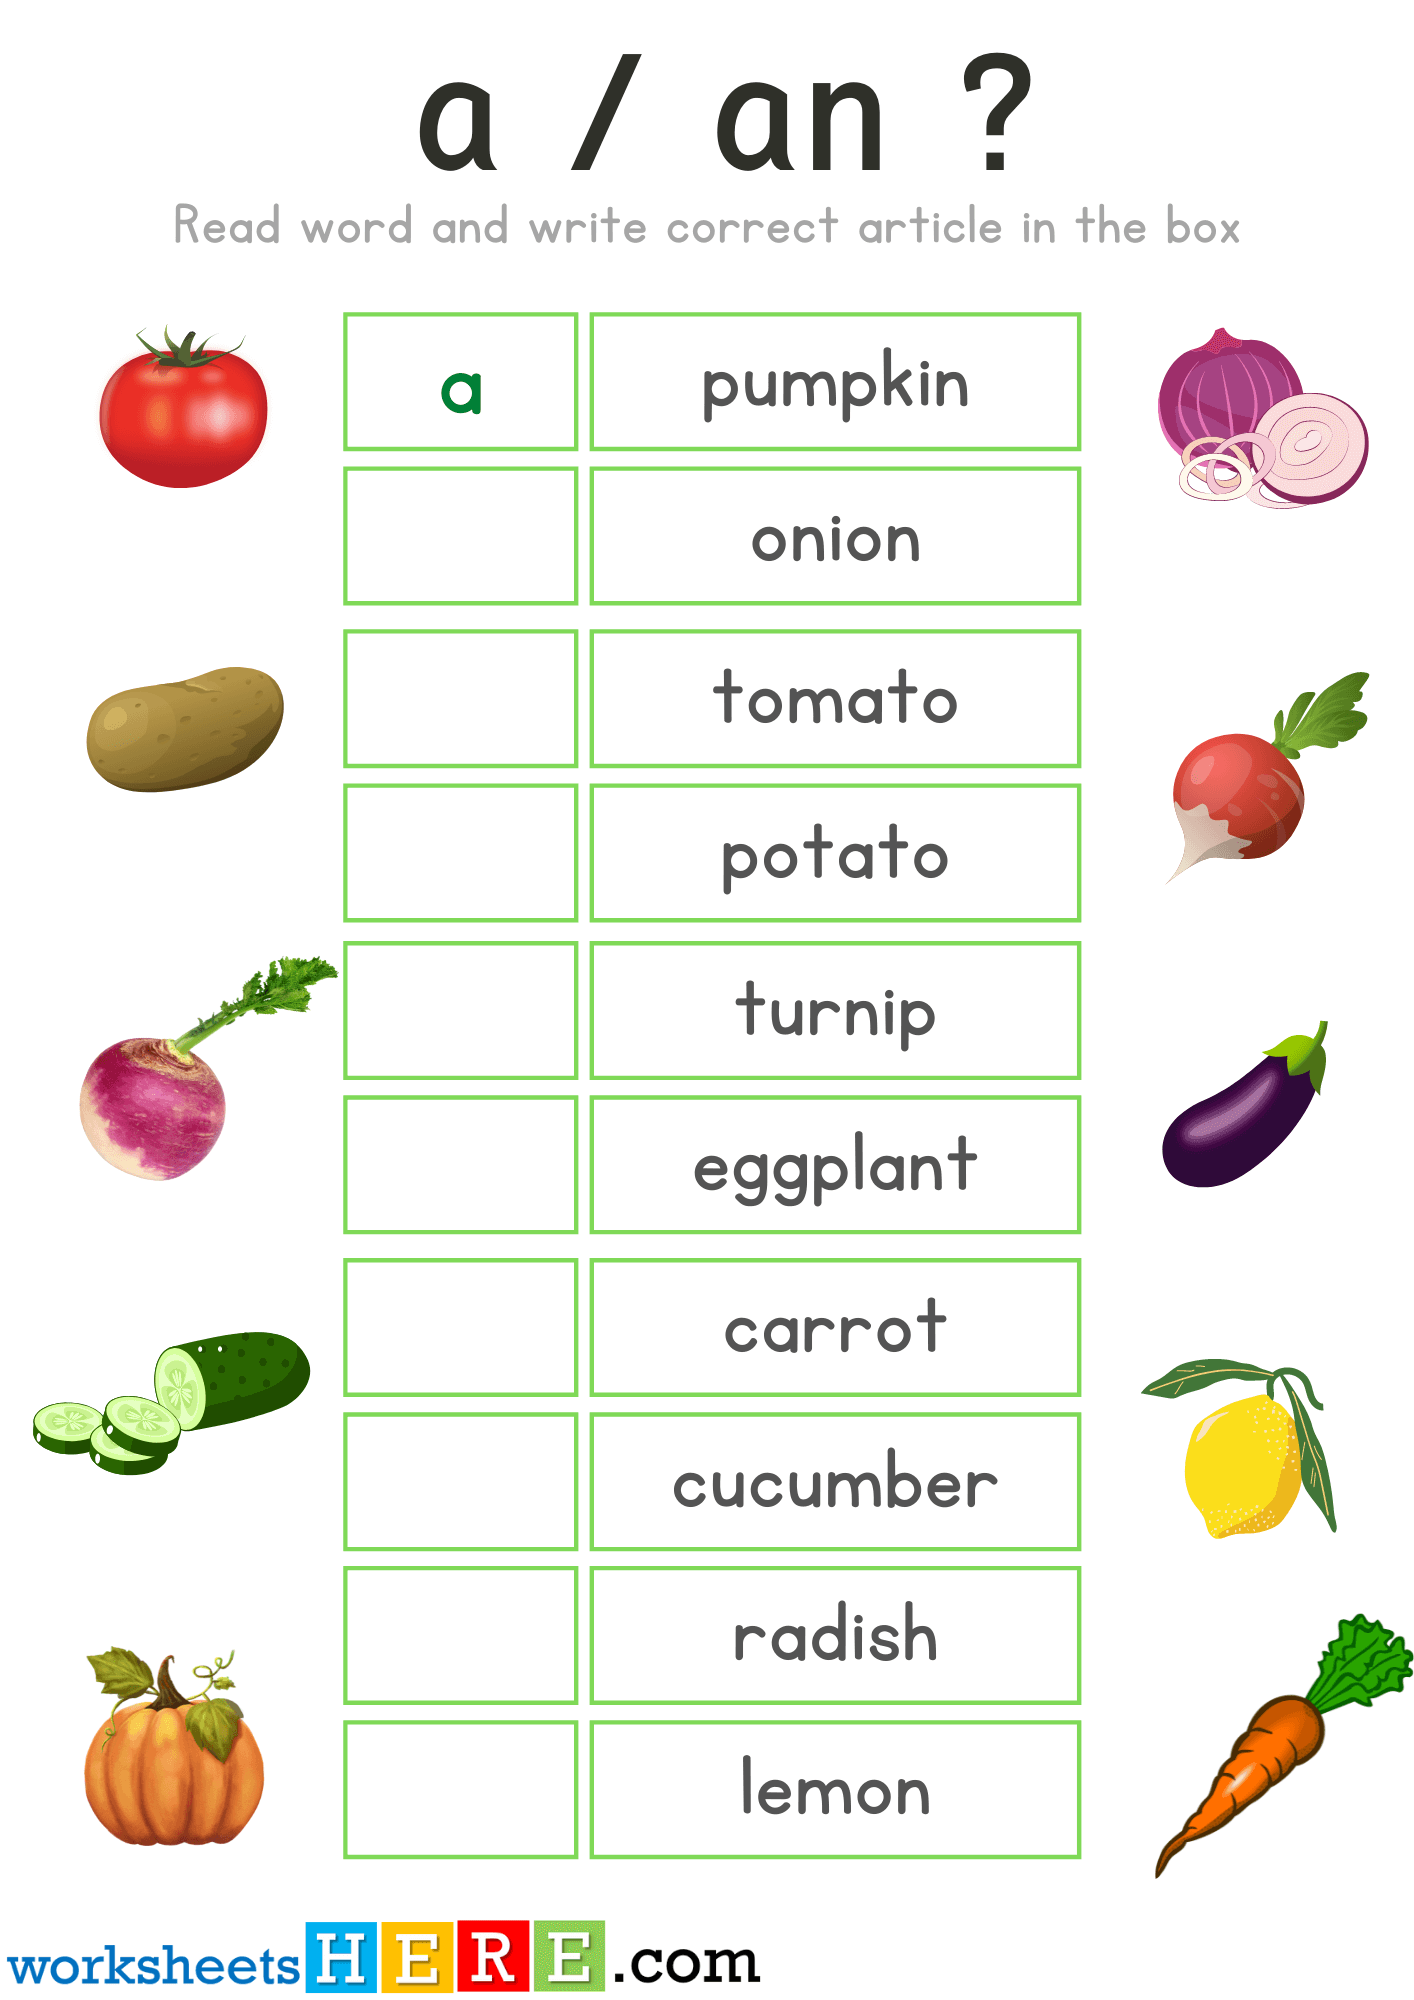 Articles Exercises with Vegetables Pictures, A or An PDF Worksheets For Students